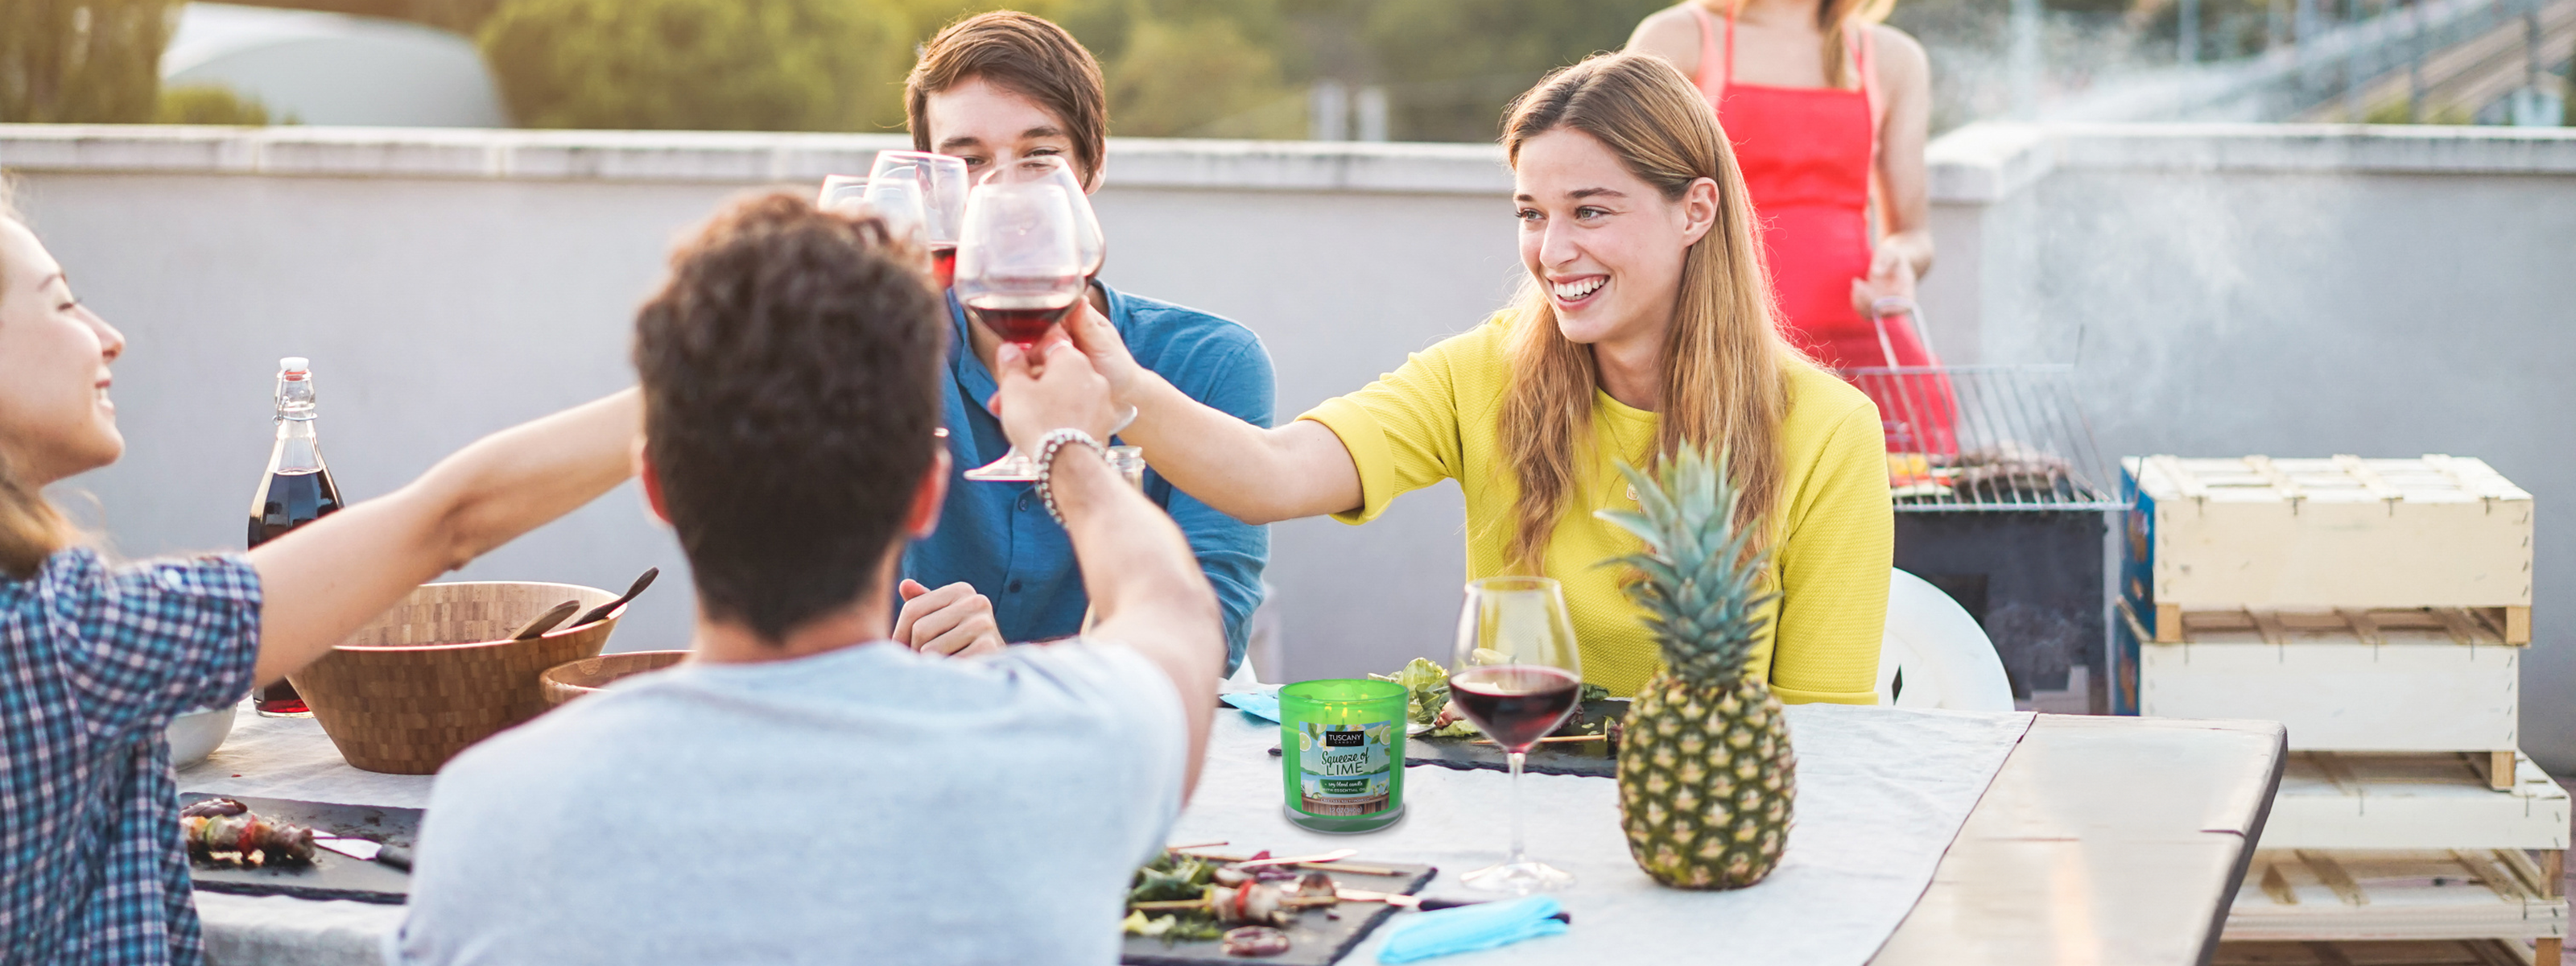 Four people sit around a table outdoors, toasting with wine glasses. A woman stands in the background tending to a grill. A pineapple and a green cup are on the table.
.